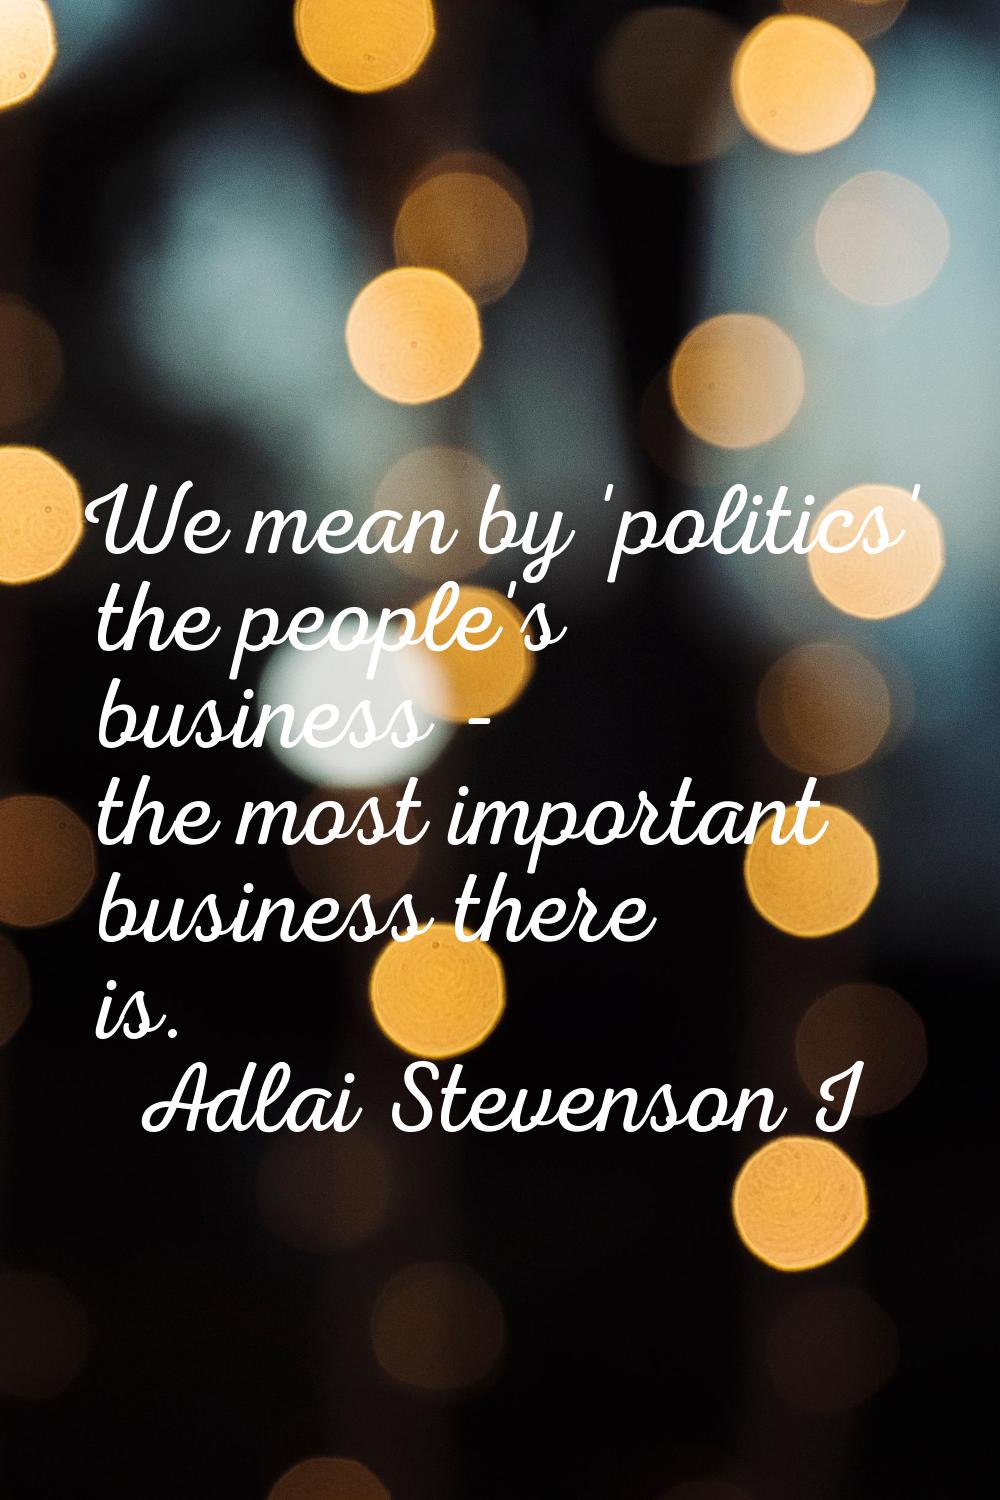 We mean by 'politics' the people's business - the most important business there is.